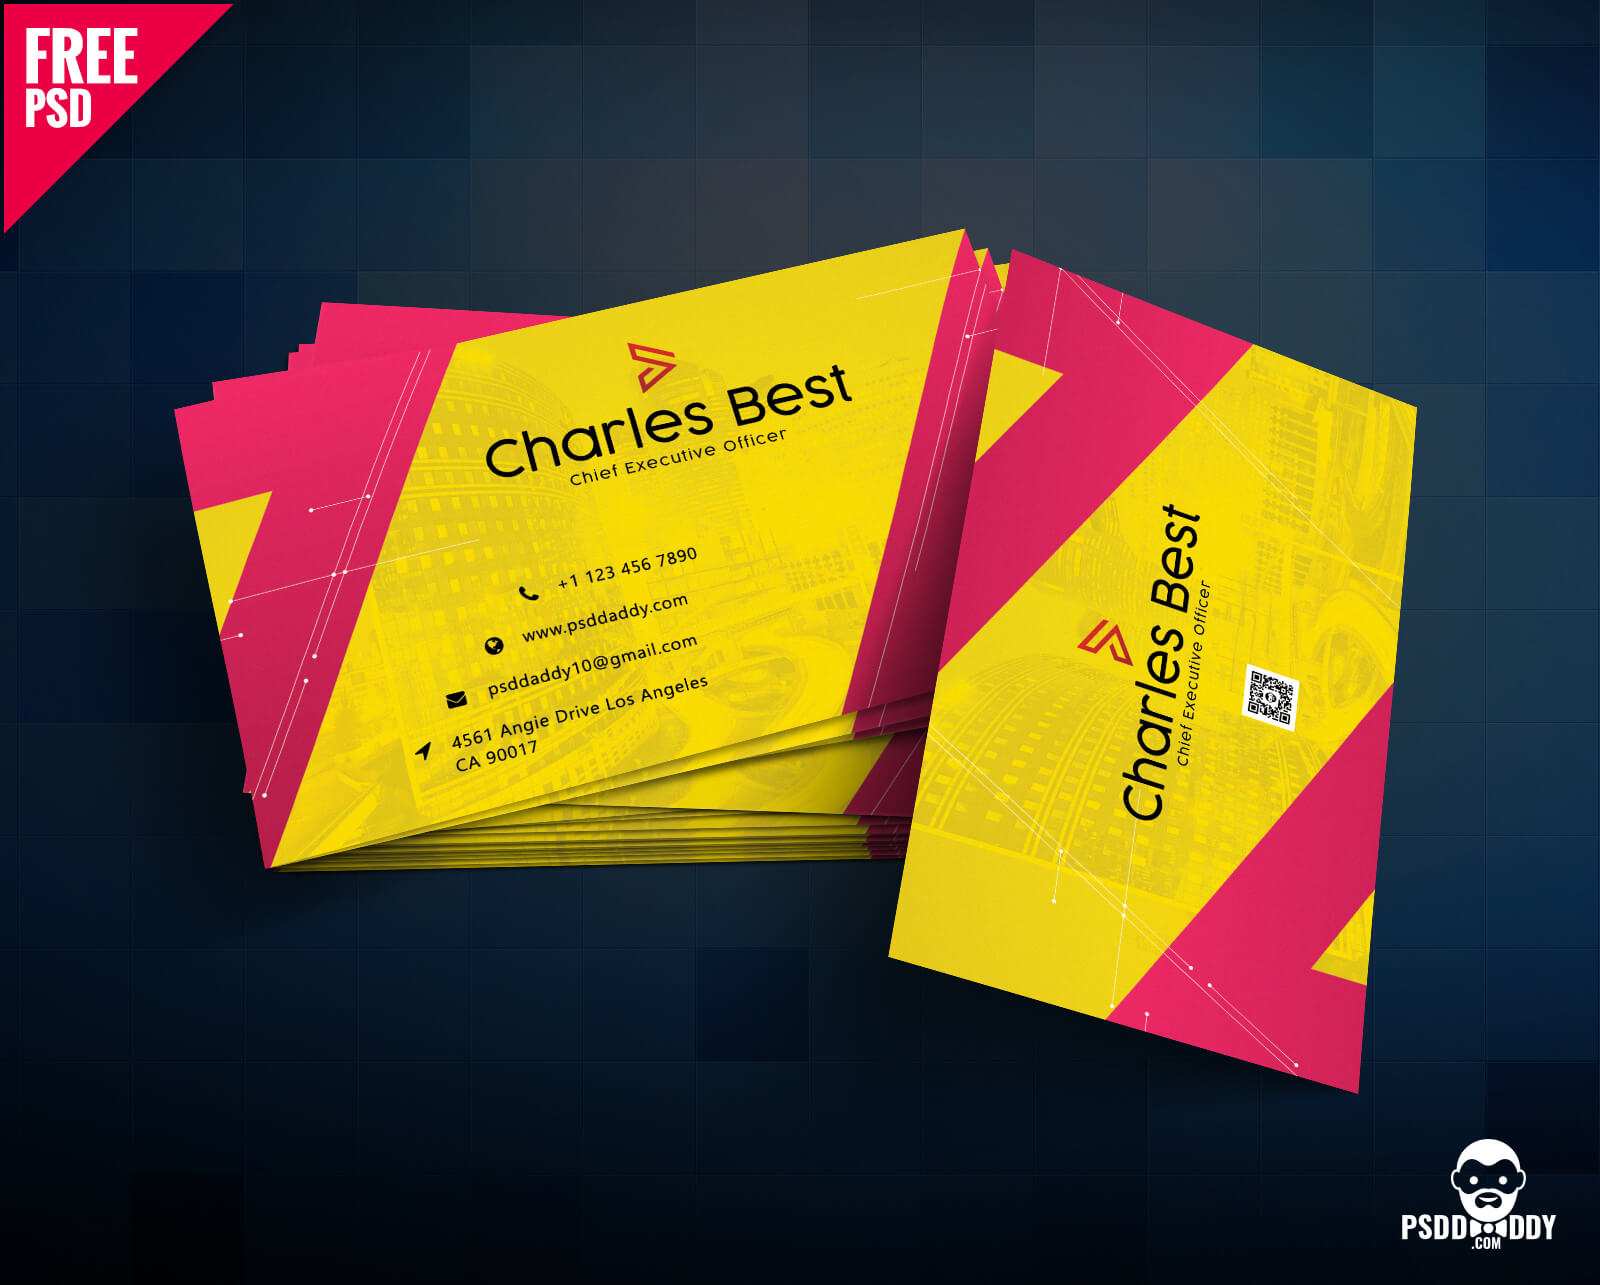 Download] Creative Business Card Free Psd | Psddaddy With Regard To Free Psd Visiting Card Templates Download